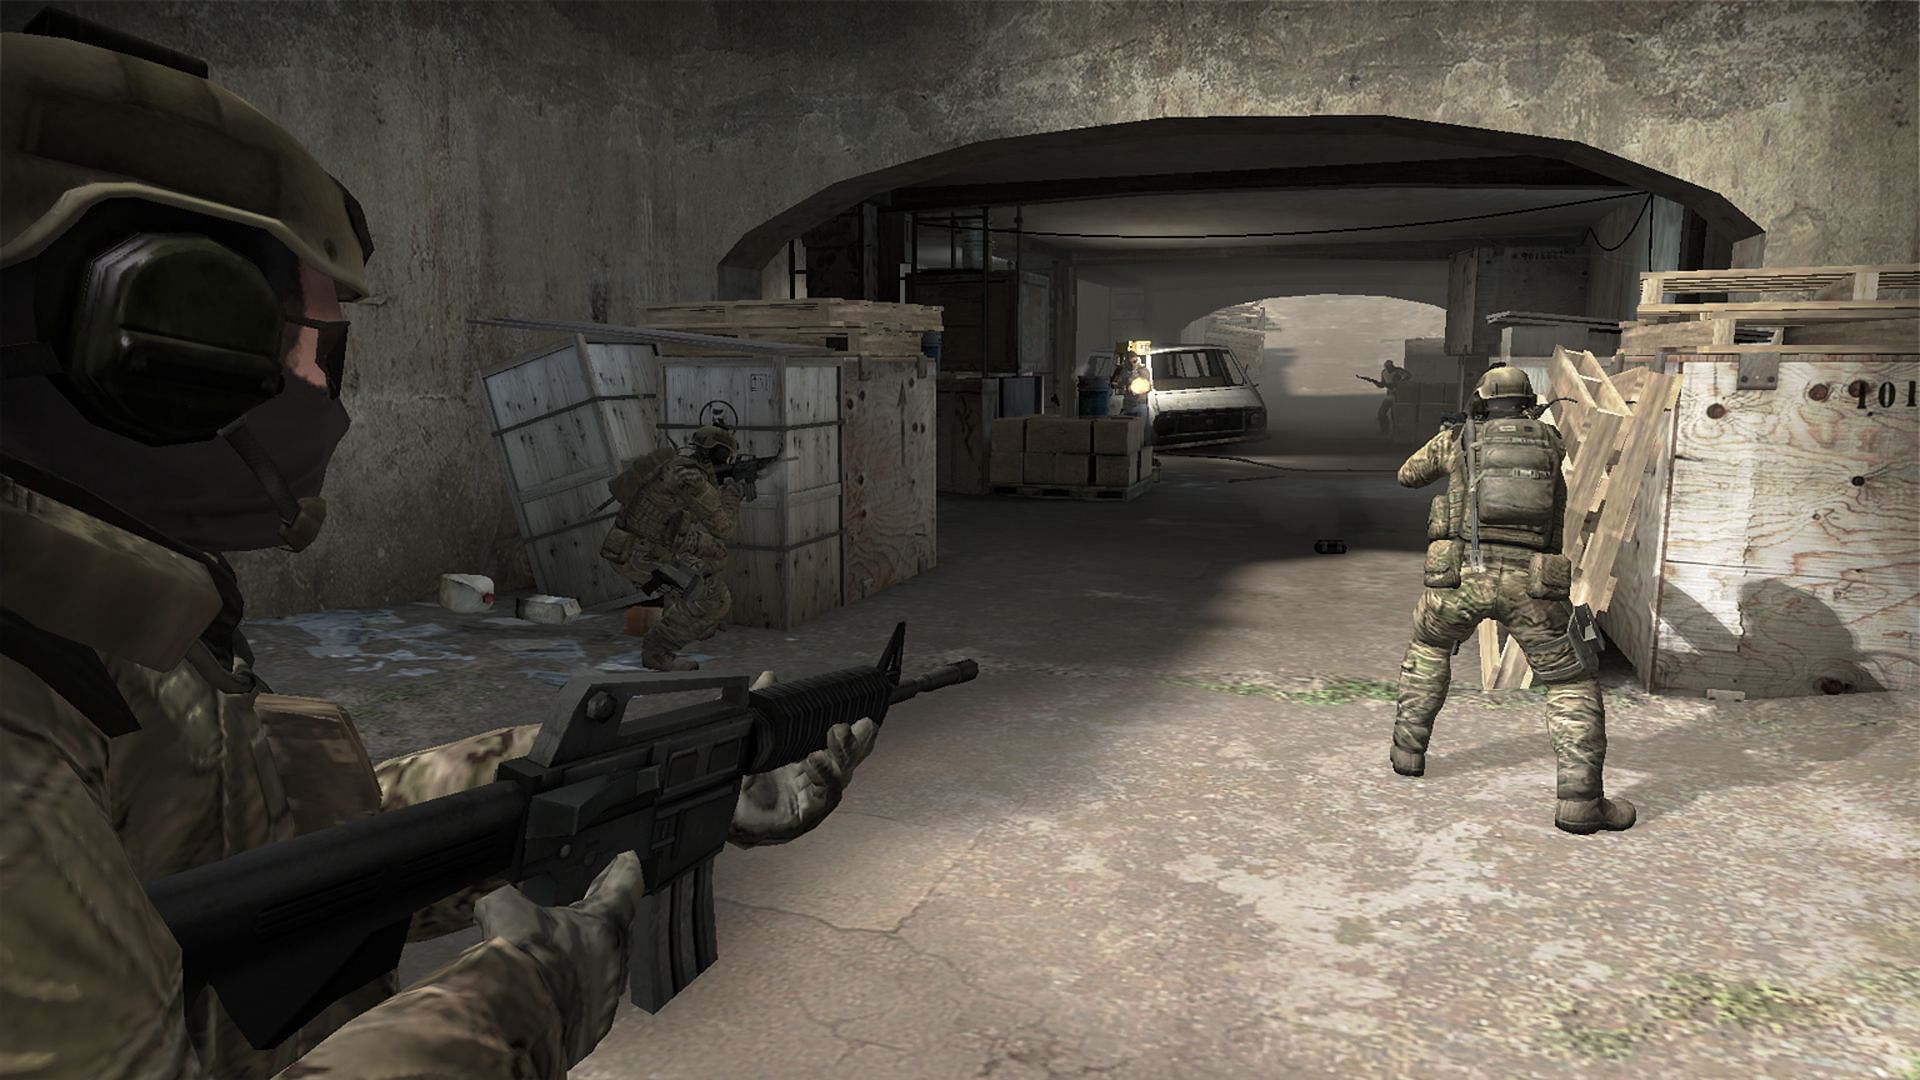 Counter-Strike 2 release date rumors indicate an expedited launch